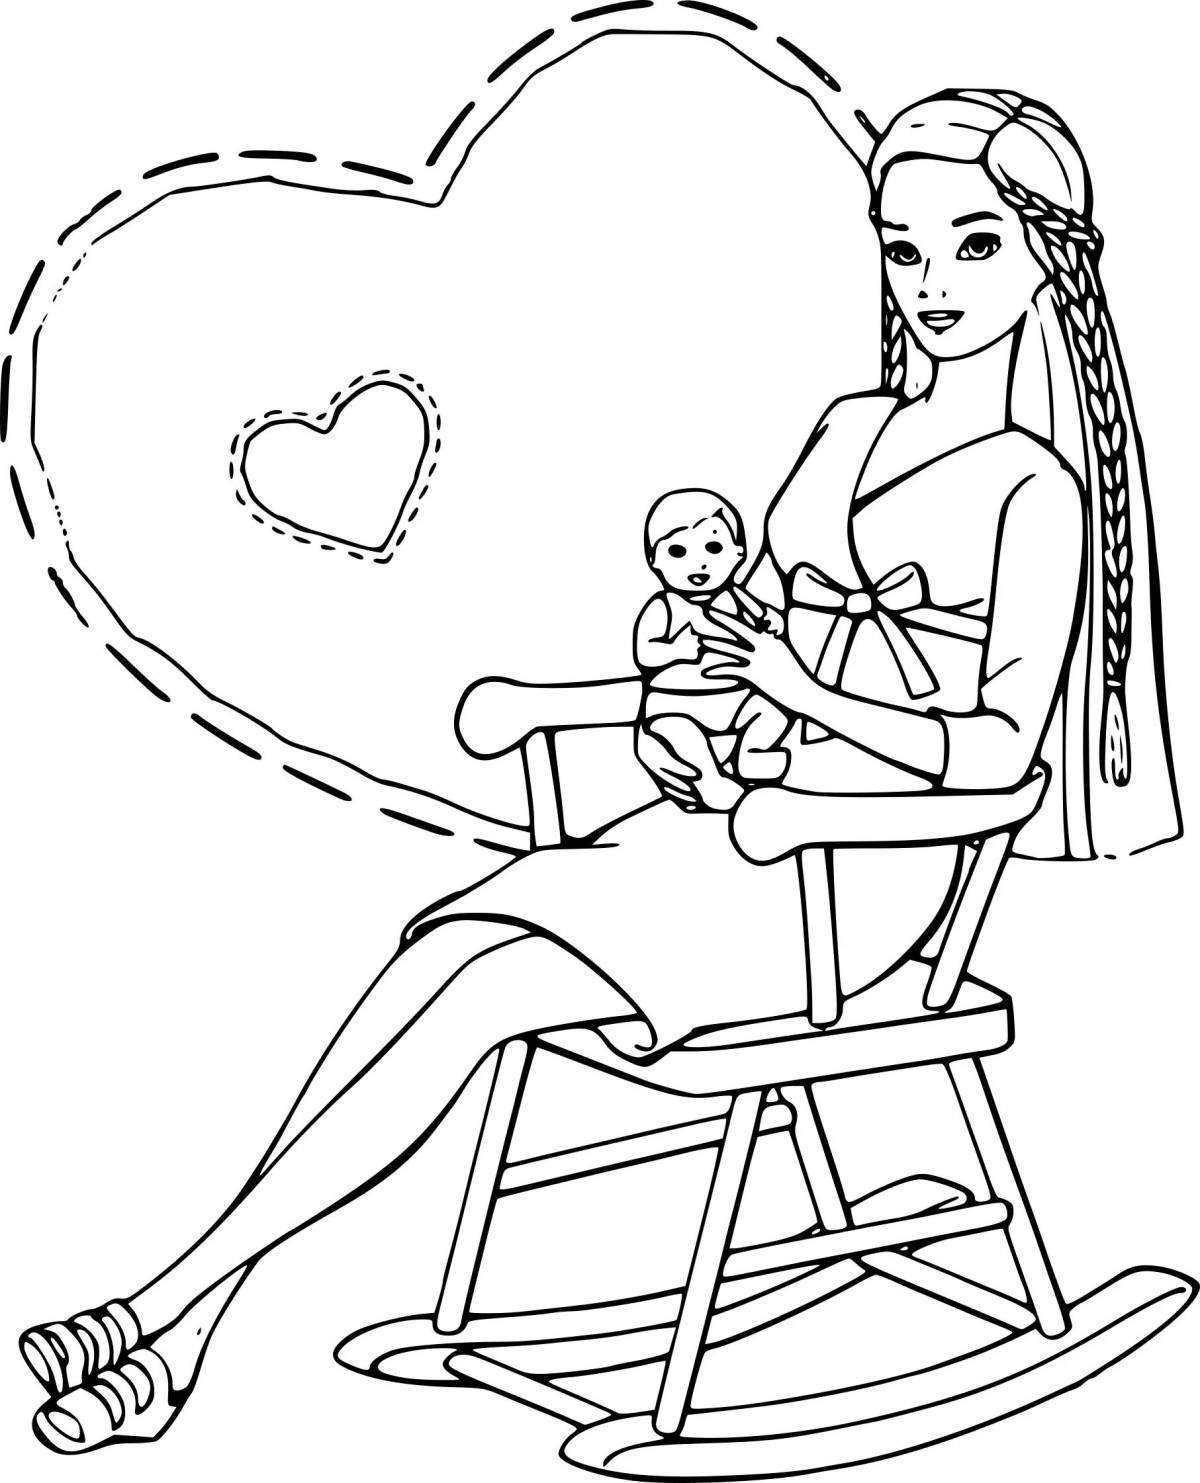 Shiny pregnant barbie coloring book